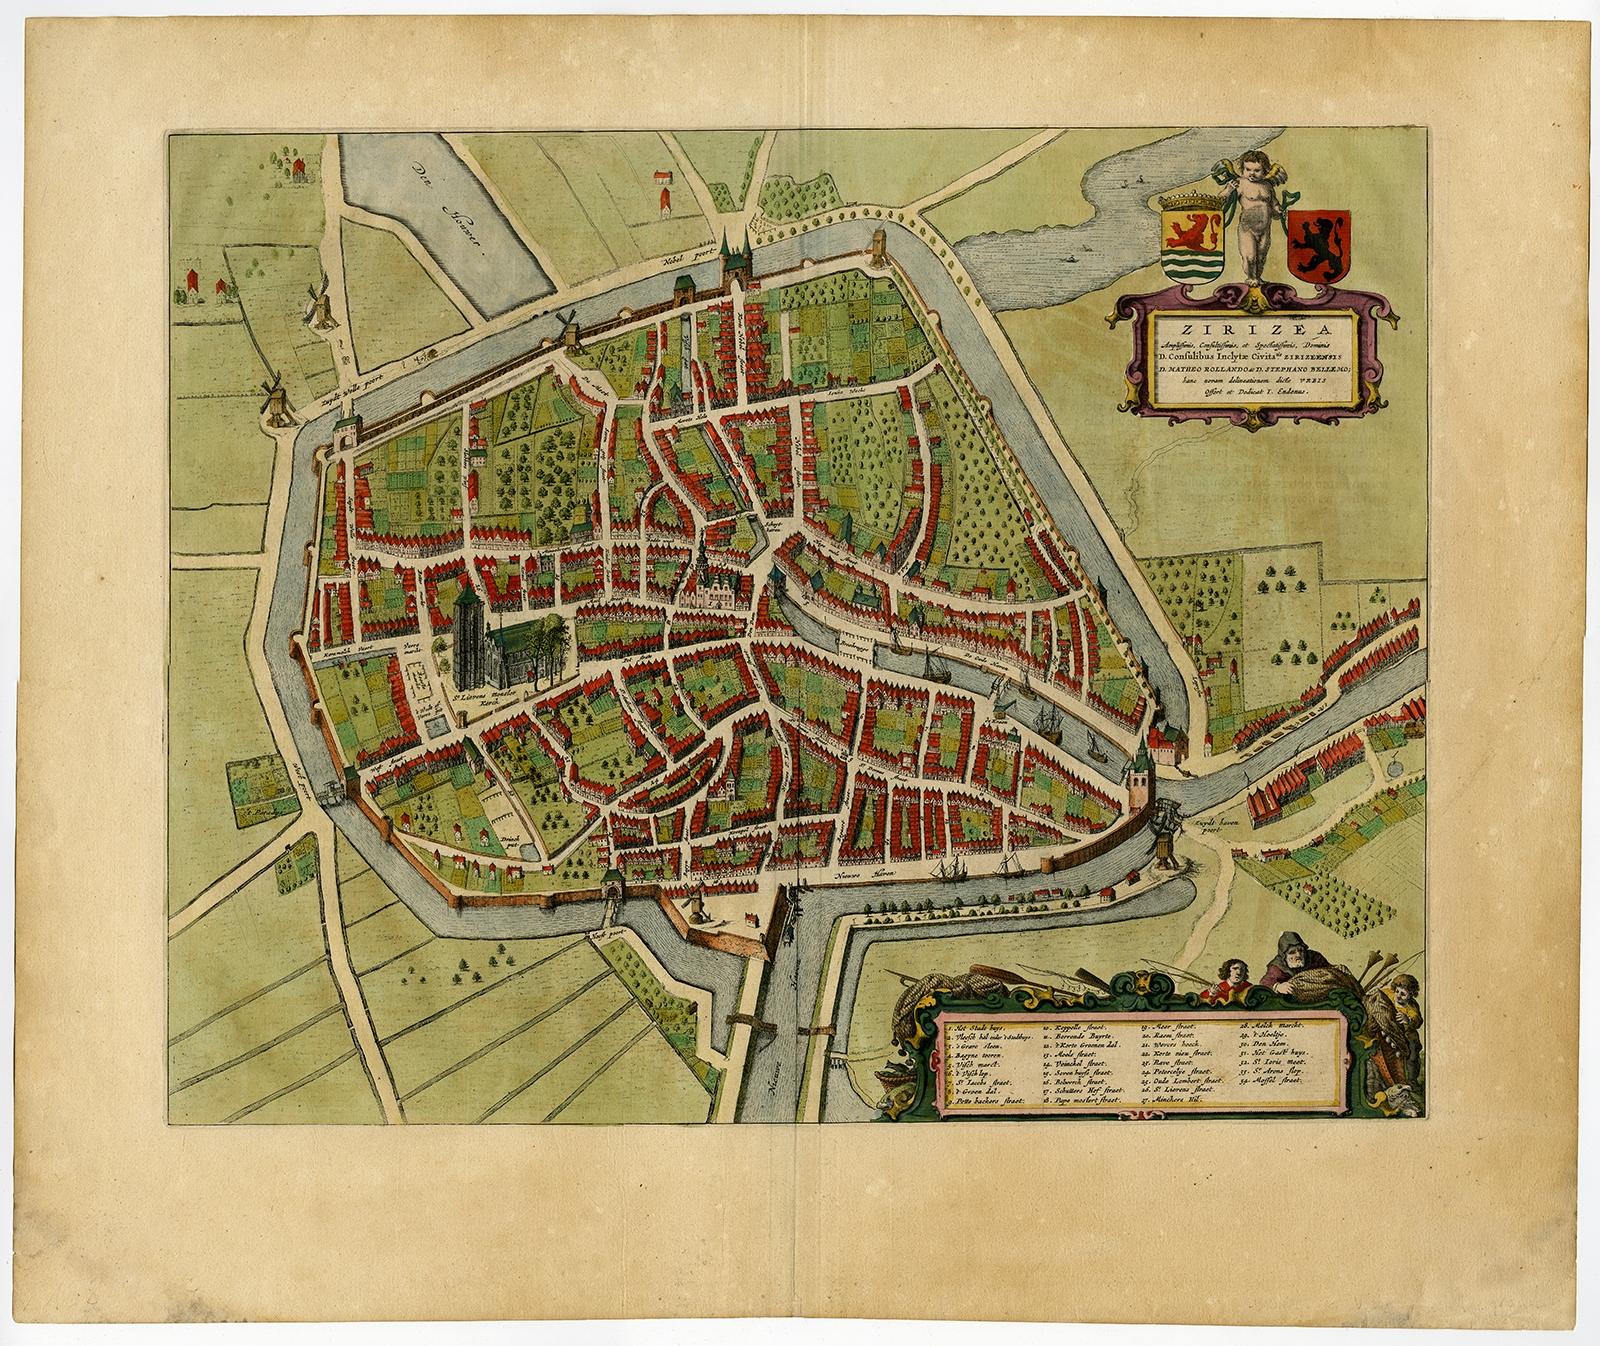 Antique print, titled: 'Zirizea.' - A bird's-eye view plan of Zierikzee in The Netherlands, with key to locations and coats of arms. After Matheo Rollando and Stephano Bellemo. Latin tekst on verso. From the city Atlas: 'Toneel der Steeden'